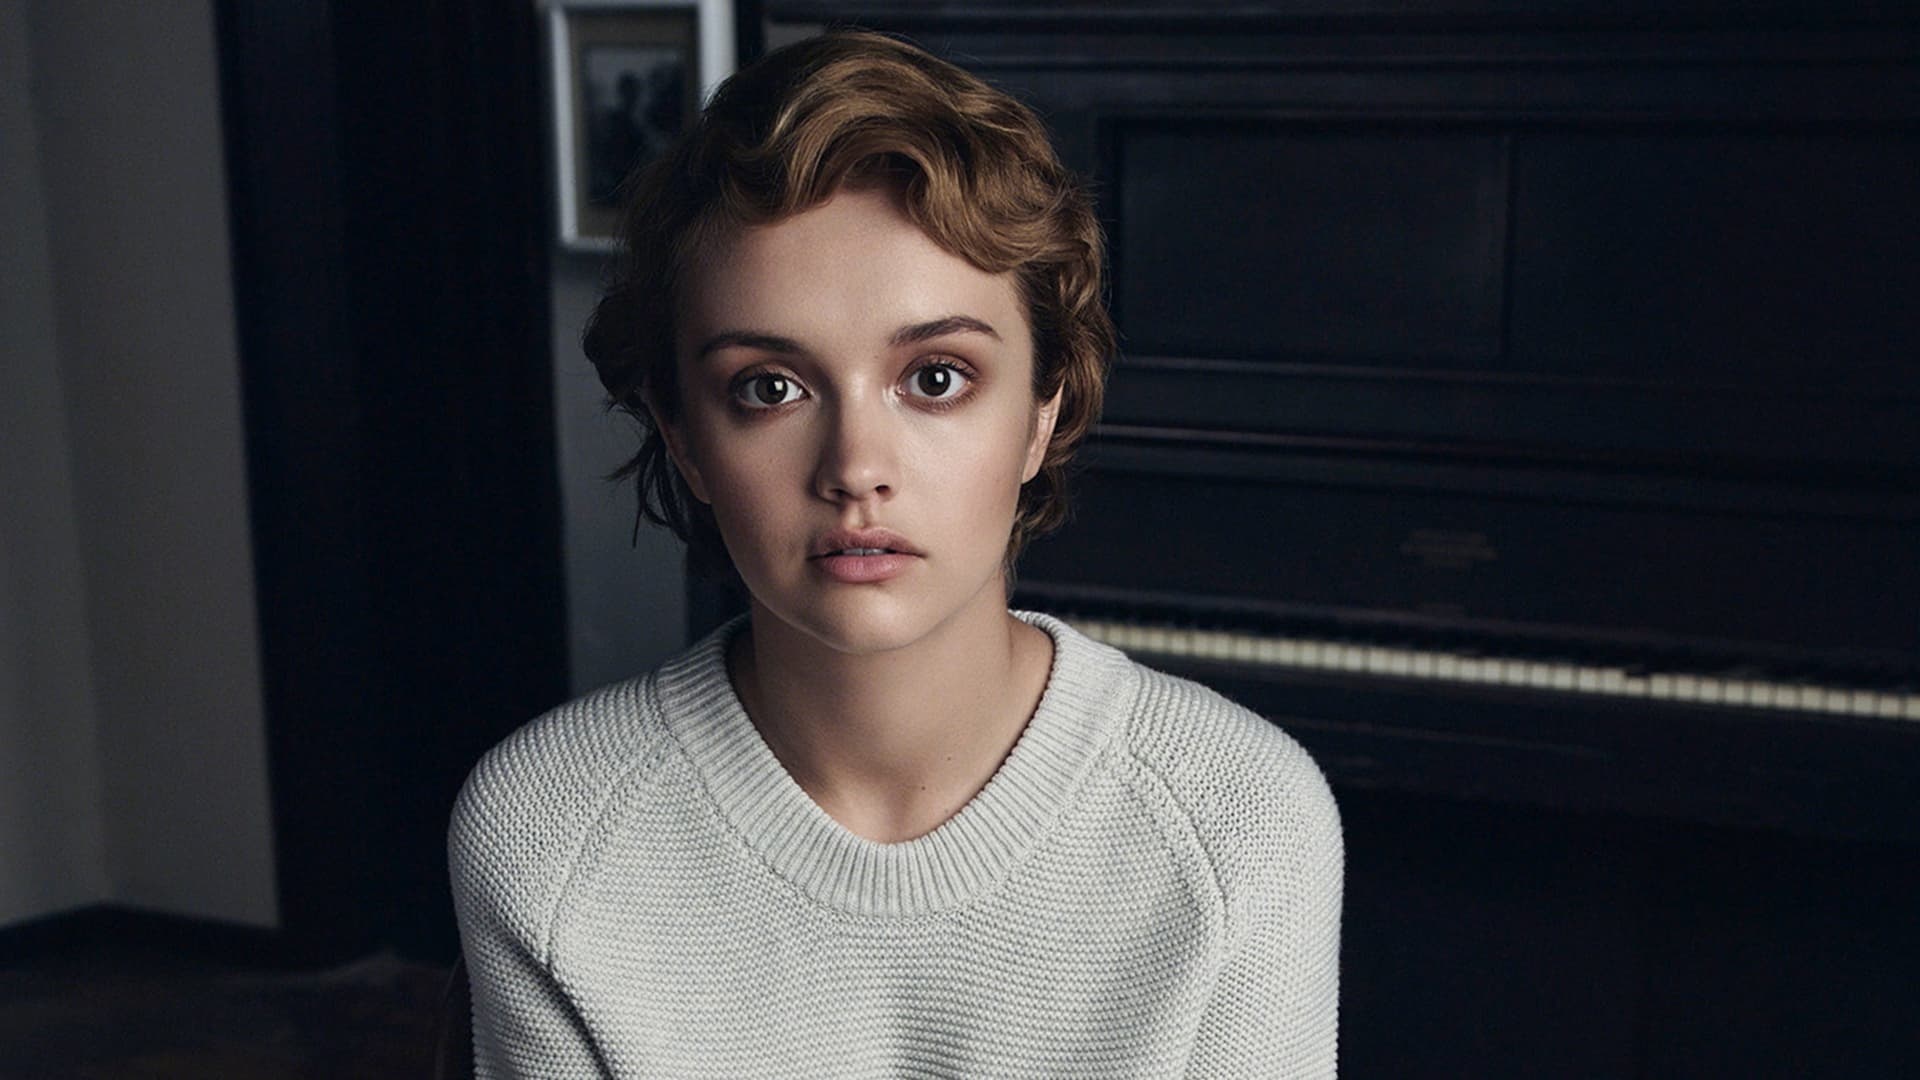 Olivia Cooke, Stunning wallpapers, High-quality images, Beautiful actress, 1920x1080 Full HD Desktop